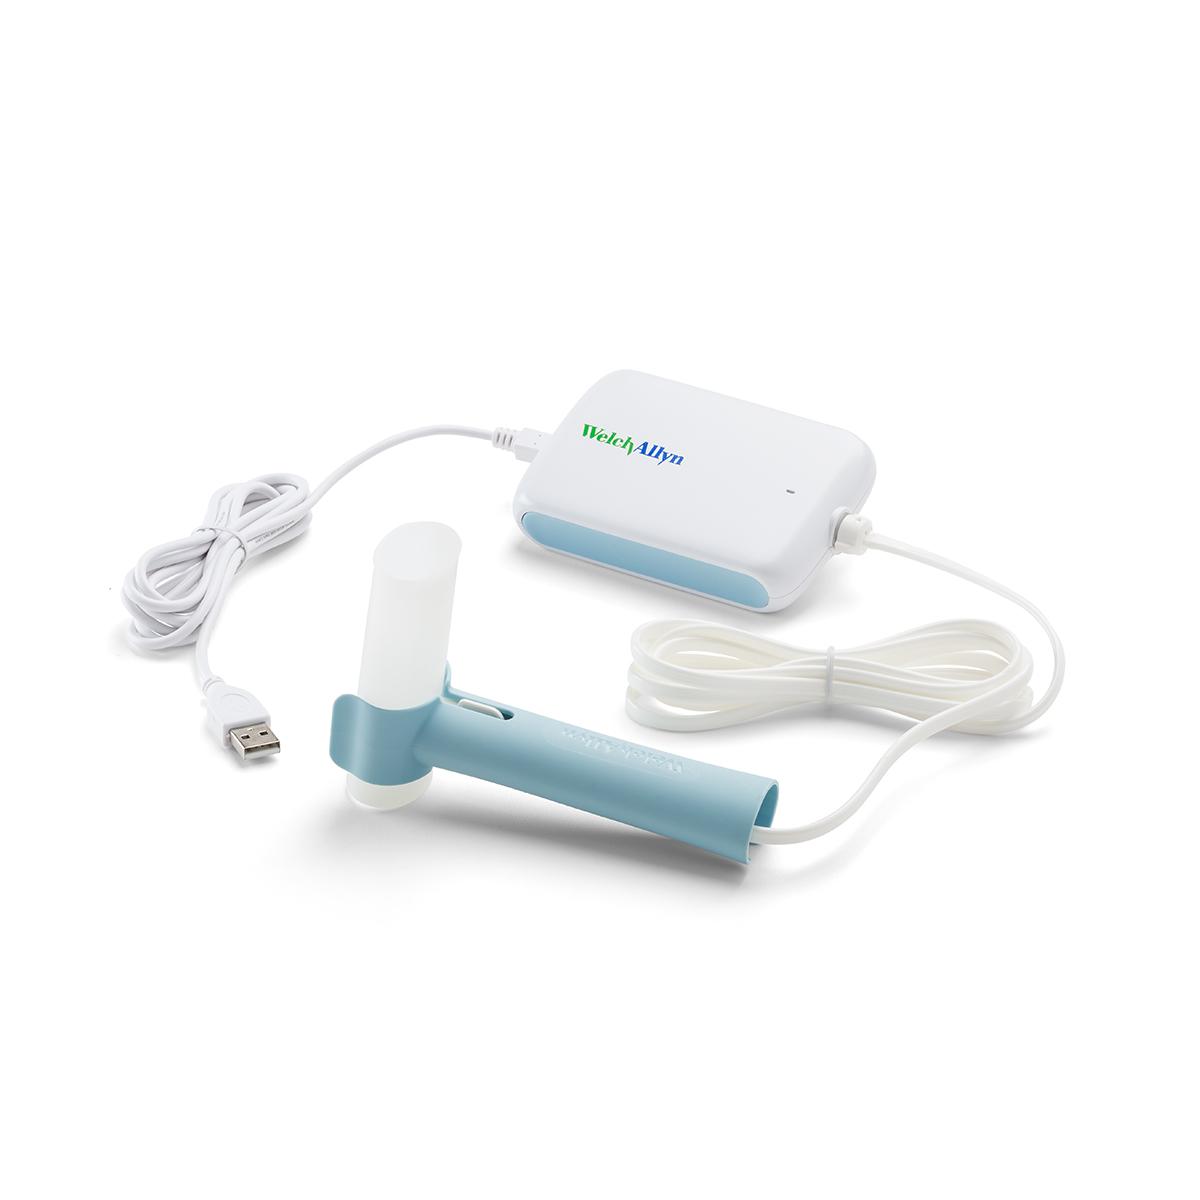 Welch Allyn Diagnostic Cardiology Suite spirometer is shown with flow tube attached